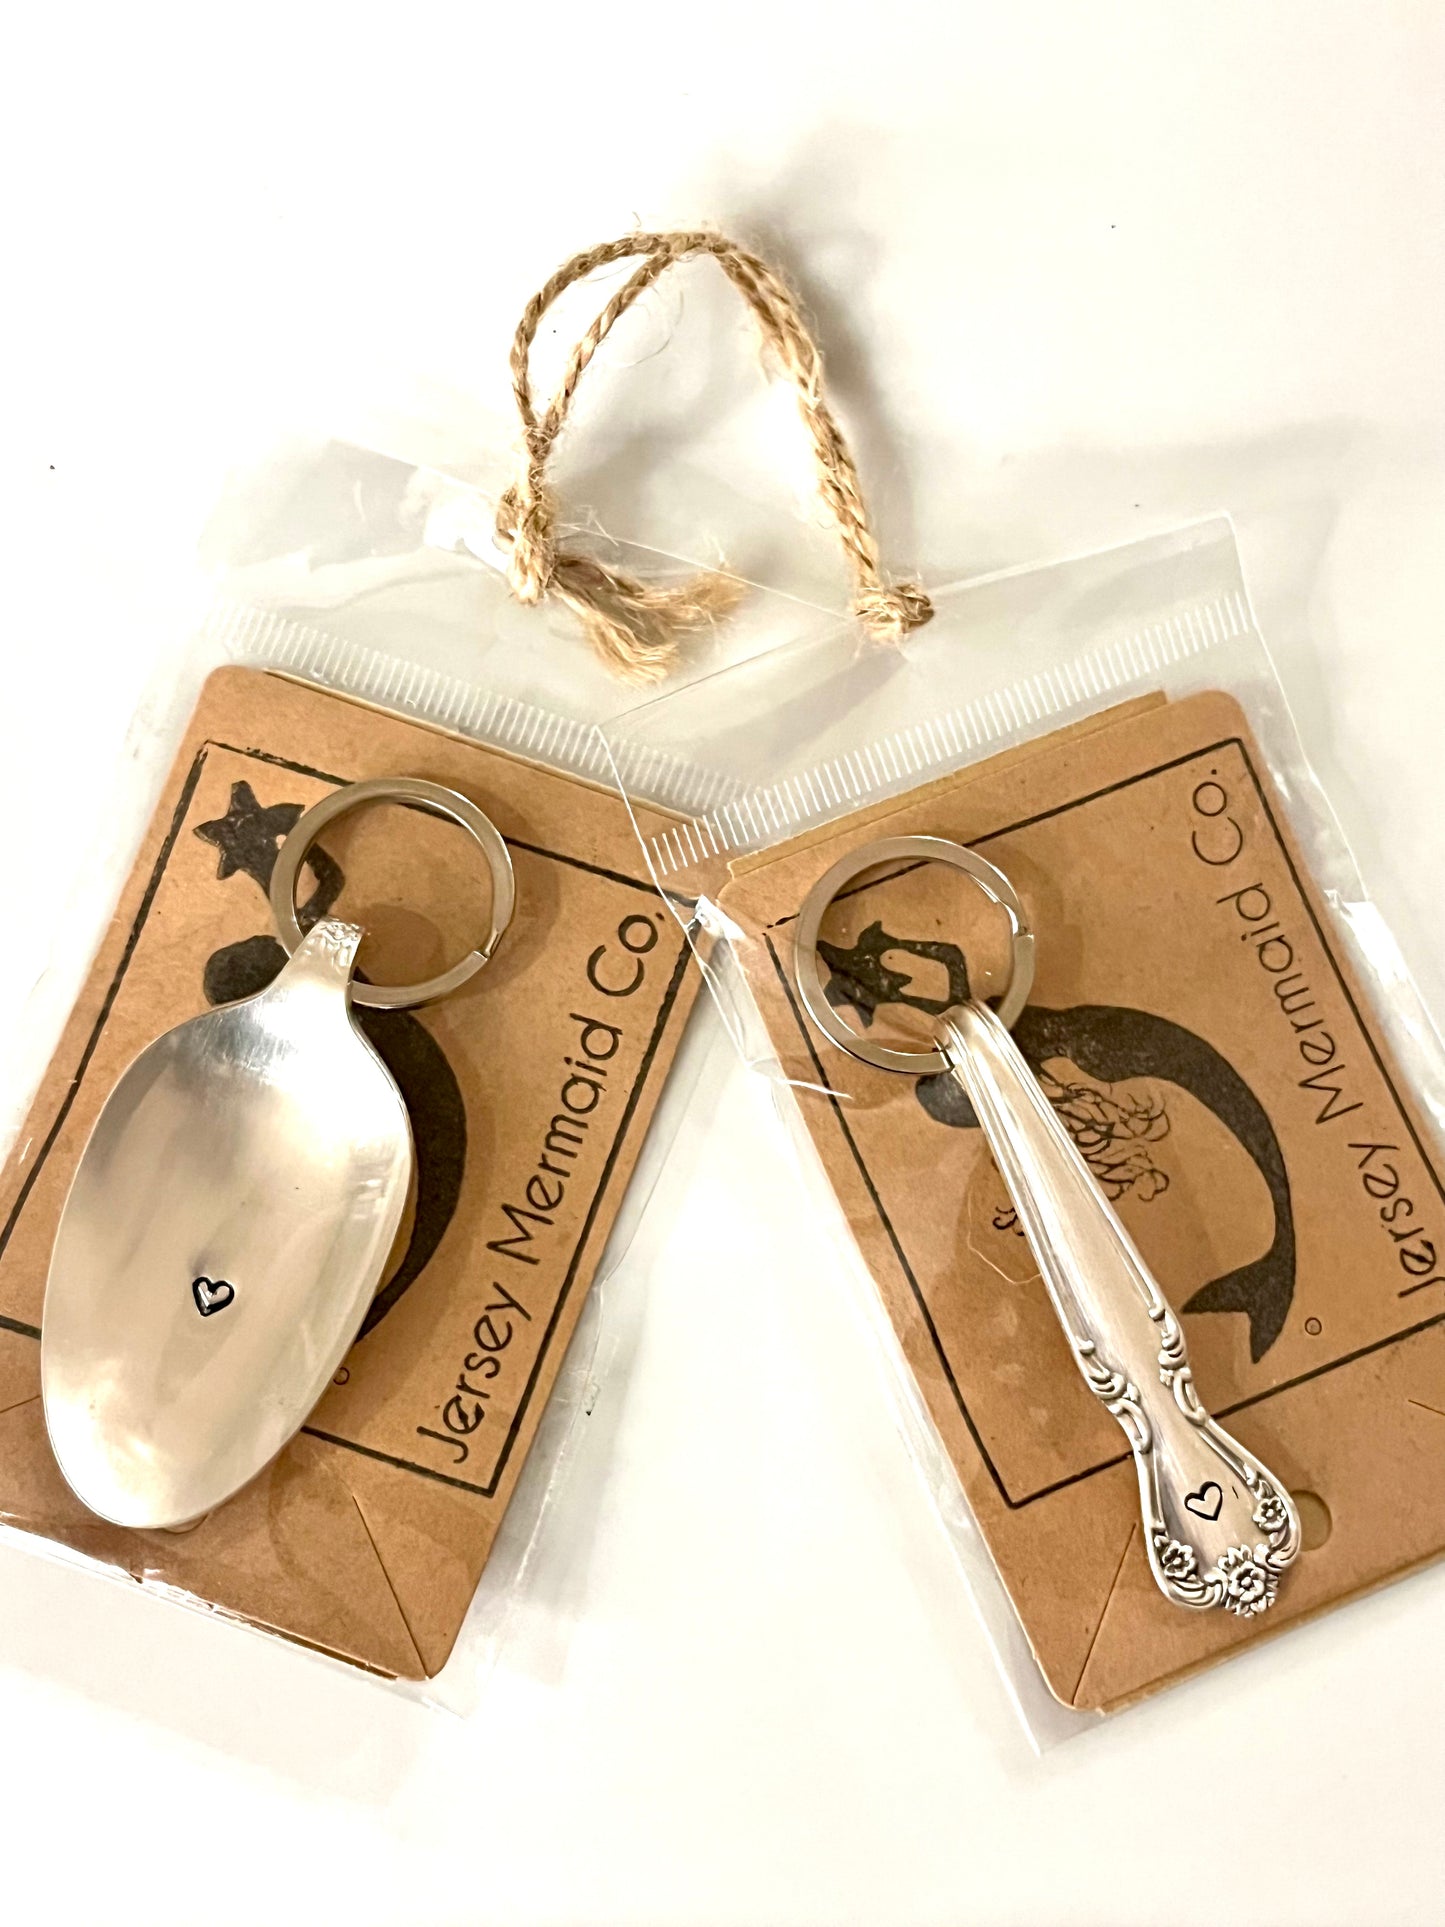 "A Serving of Love" - keychains * silverware patterns may vary